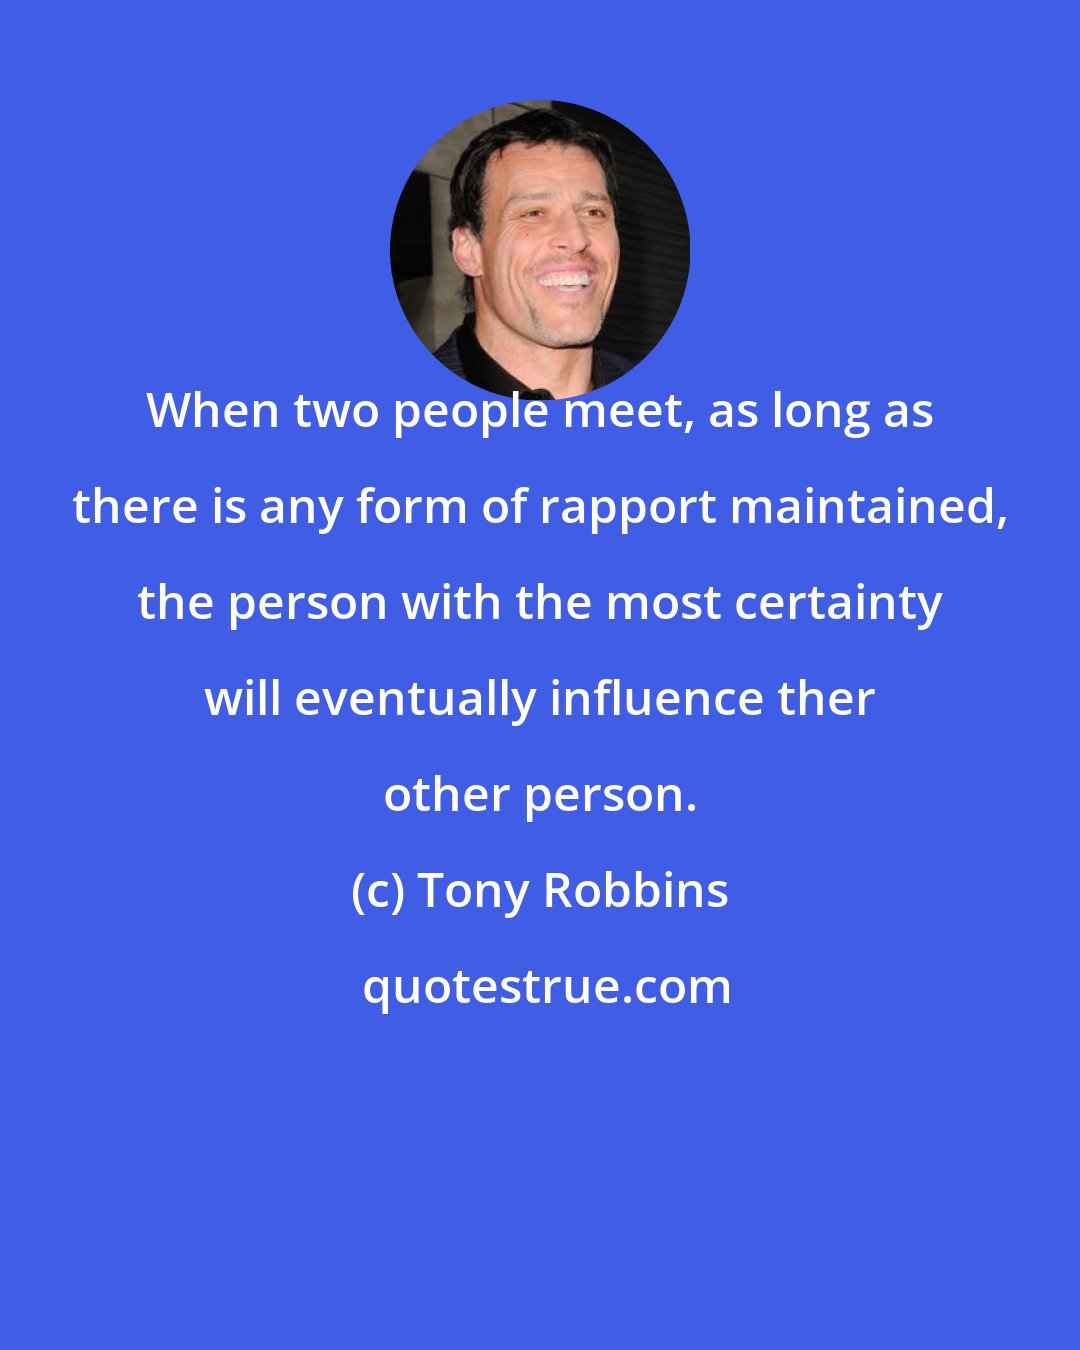 Tony Robbins: When two people meet, as long as there is any form of rapport maintained, the person with the most certainty will eventually influence ther other person.